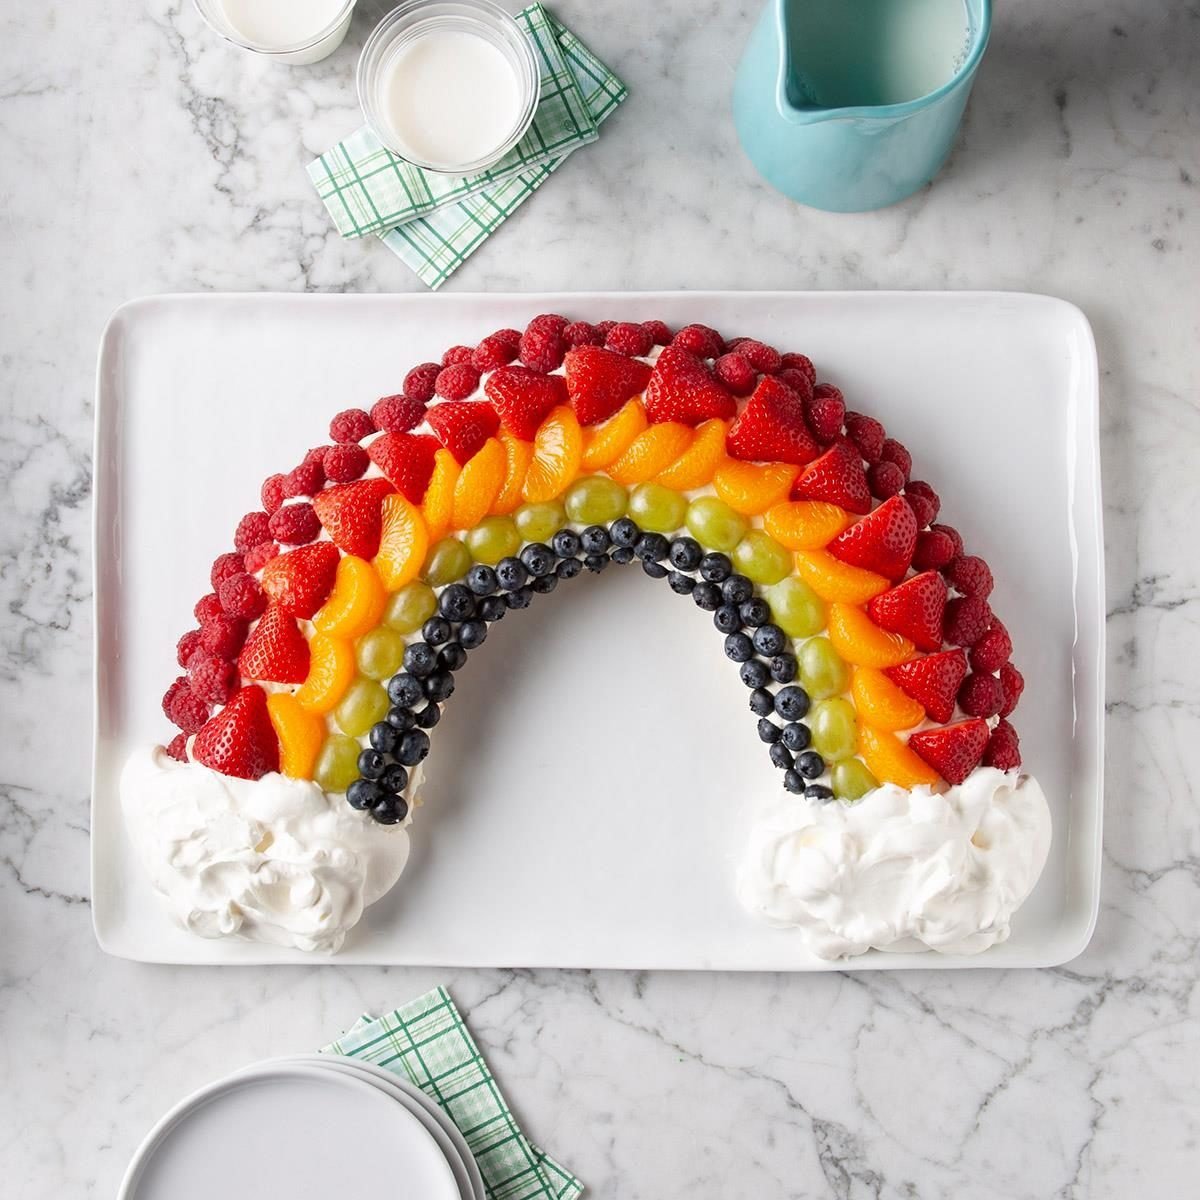 Rainbow Recipes to Brighten Your Pride Month